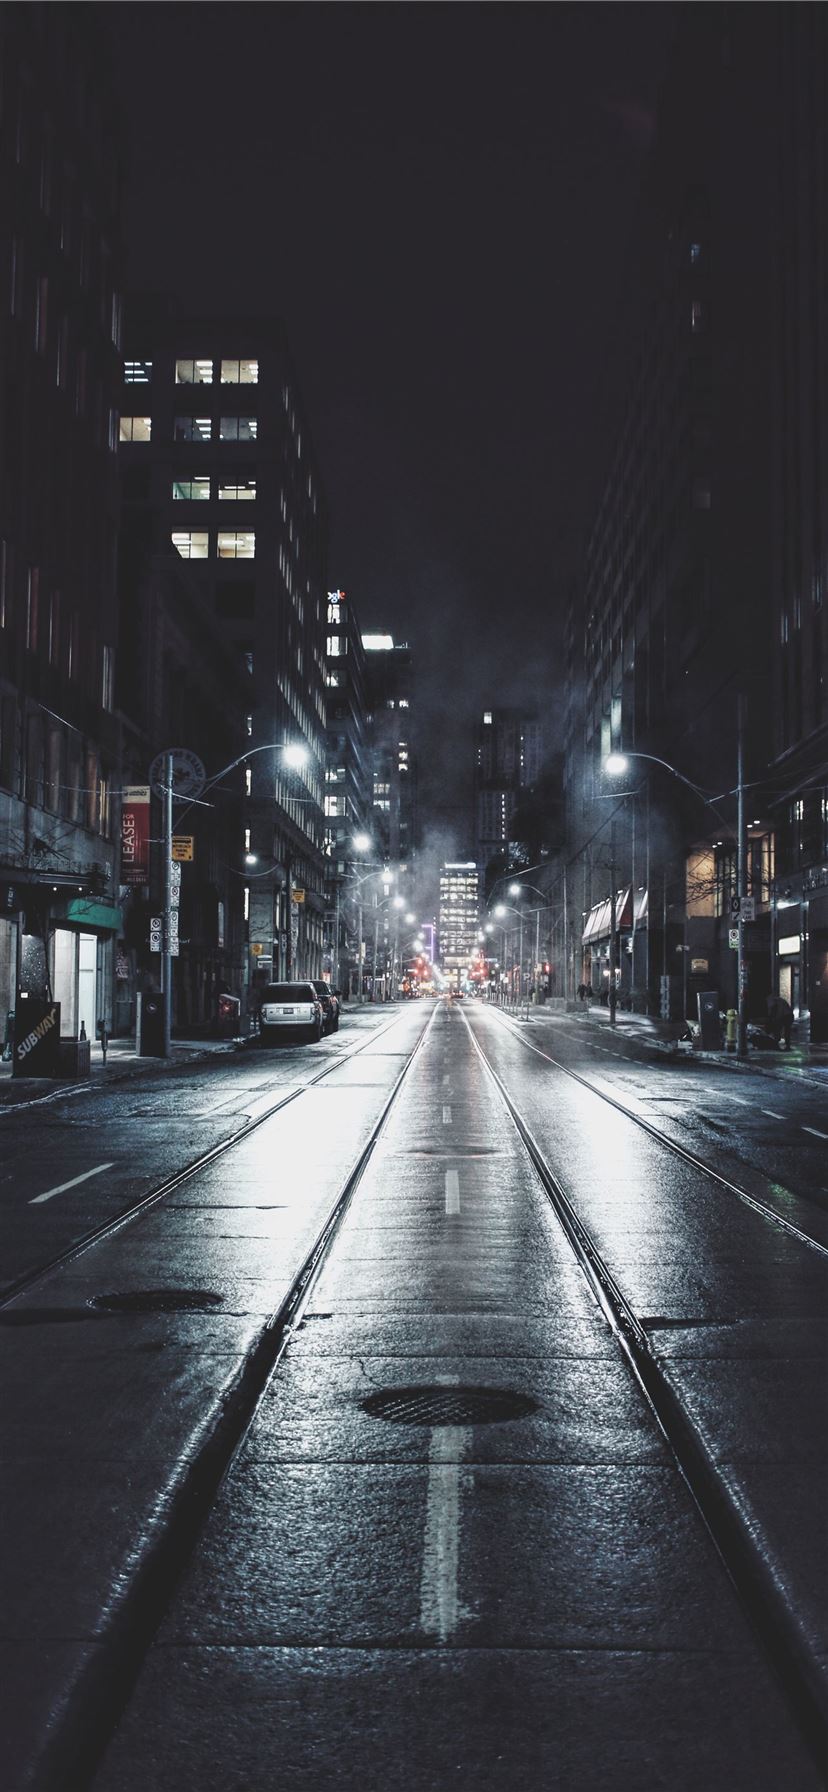 empty road in city during night iPhone 11 wallpaper 